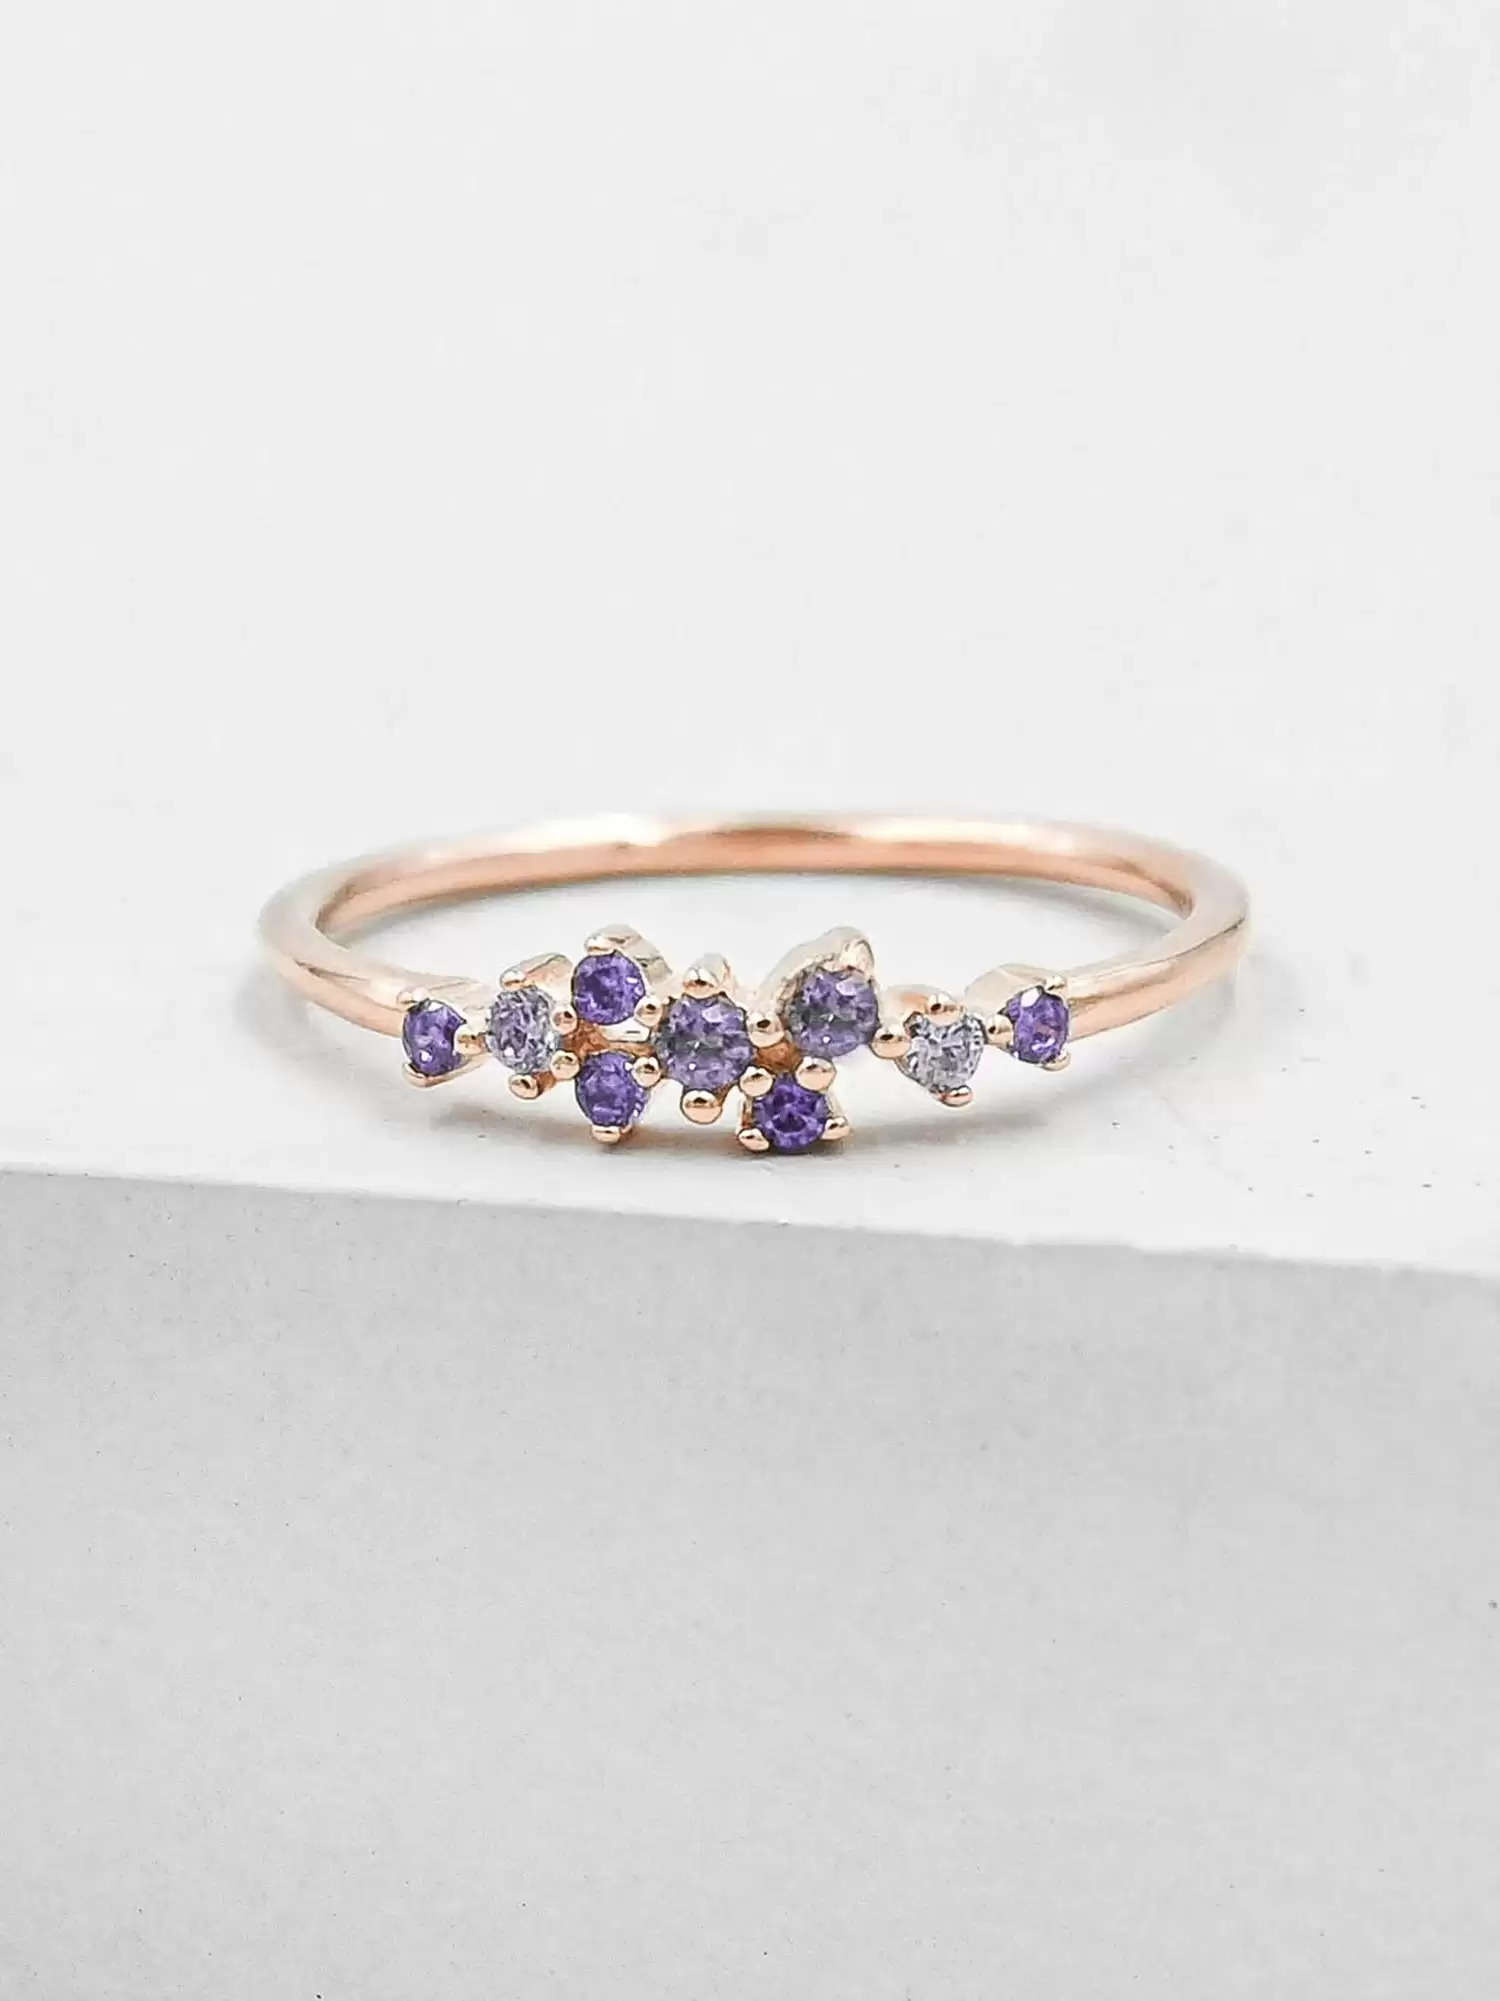 The Prettiest Birthstone Rings for Each Month